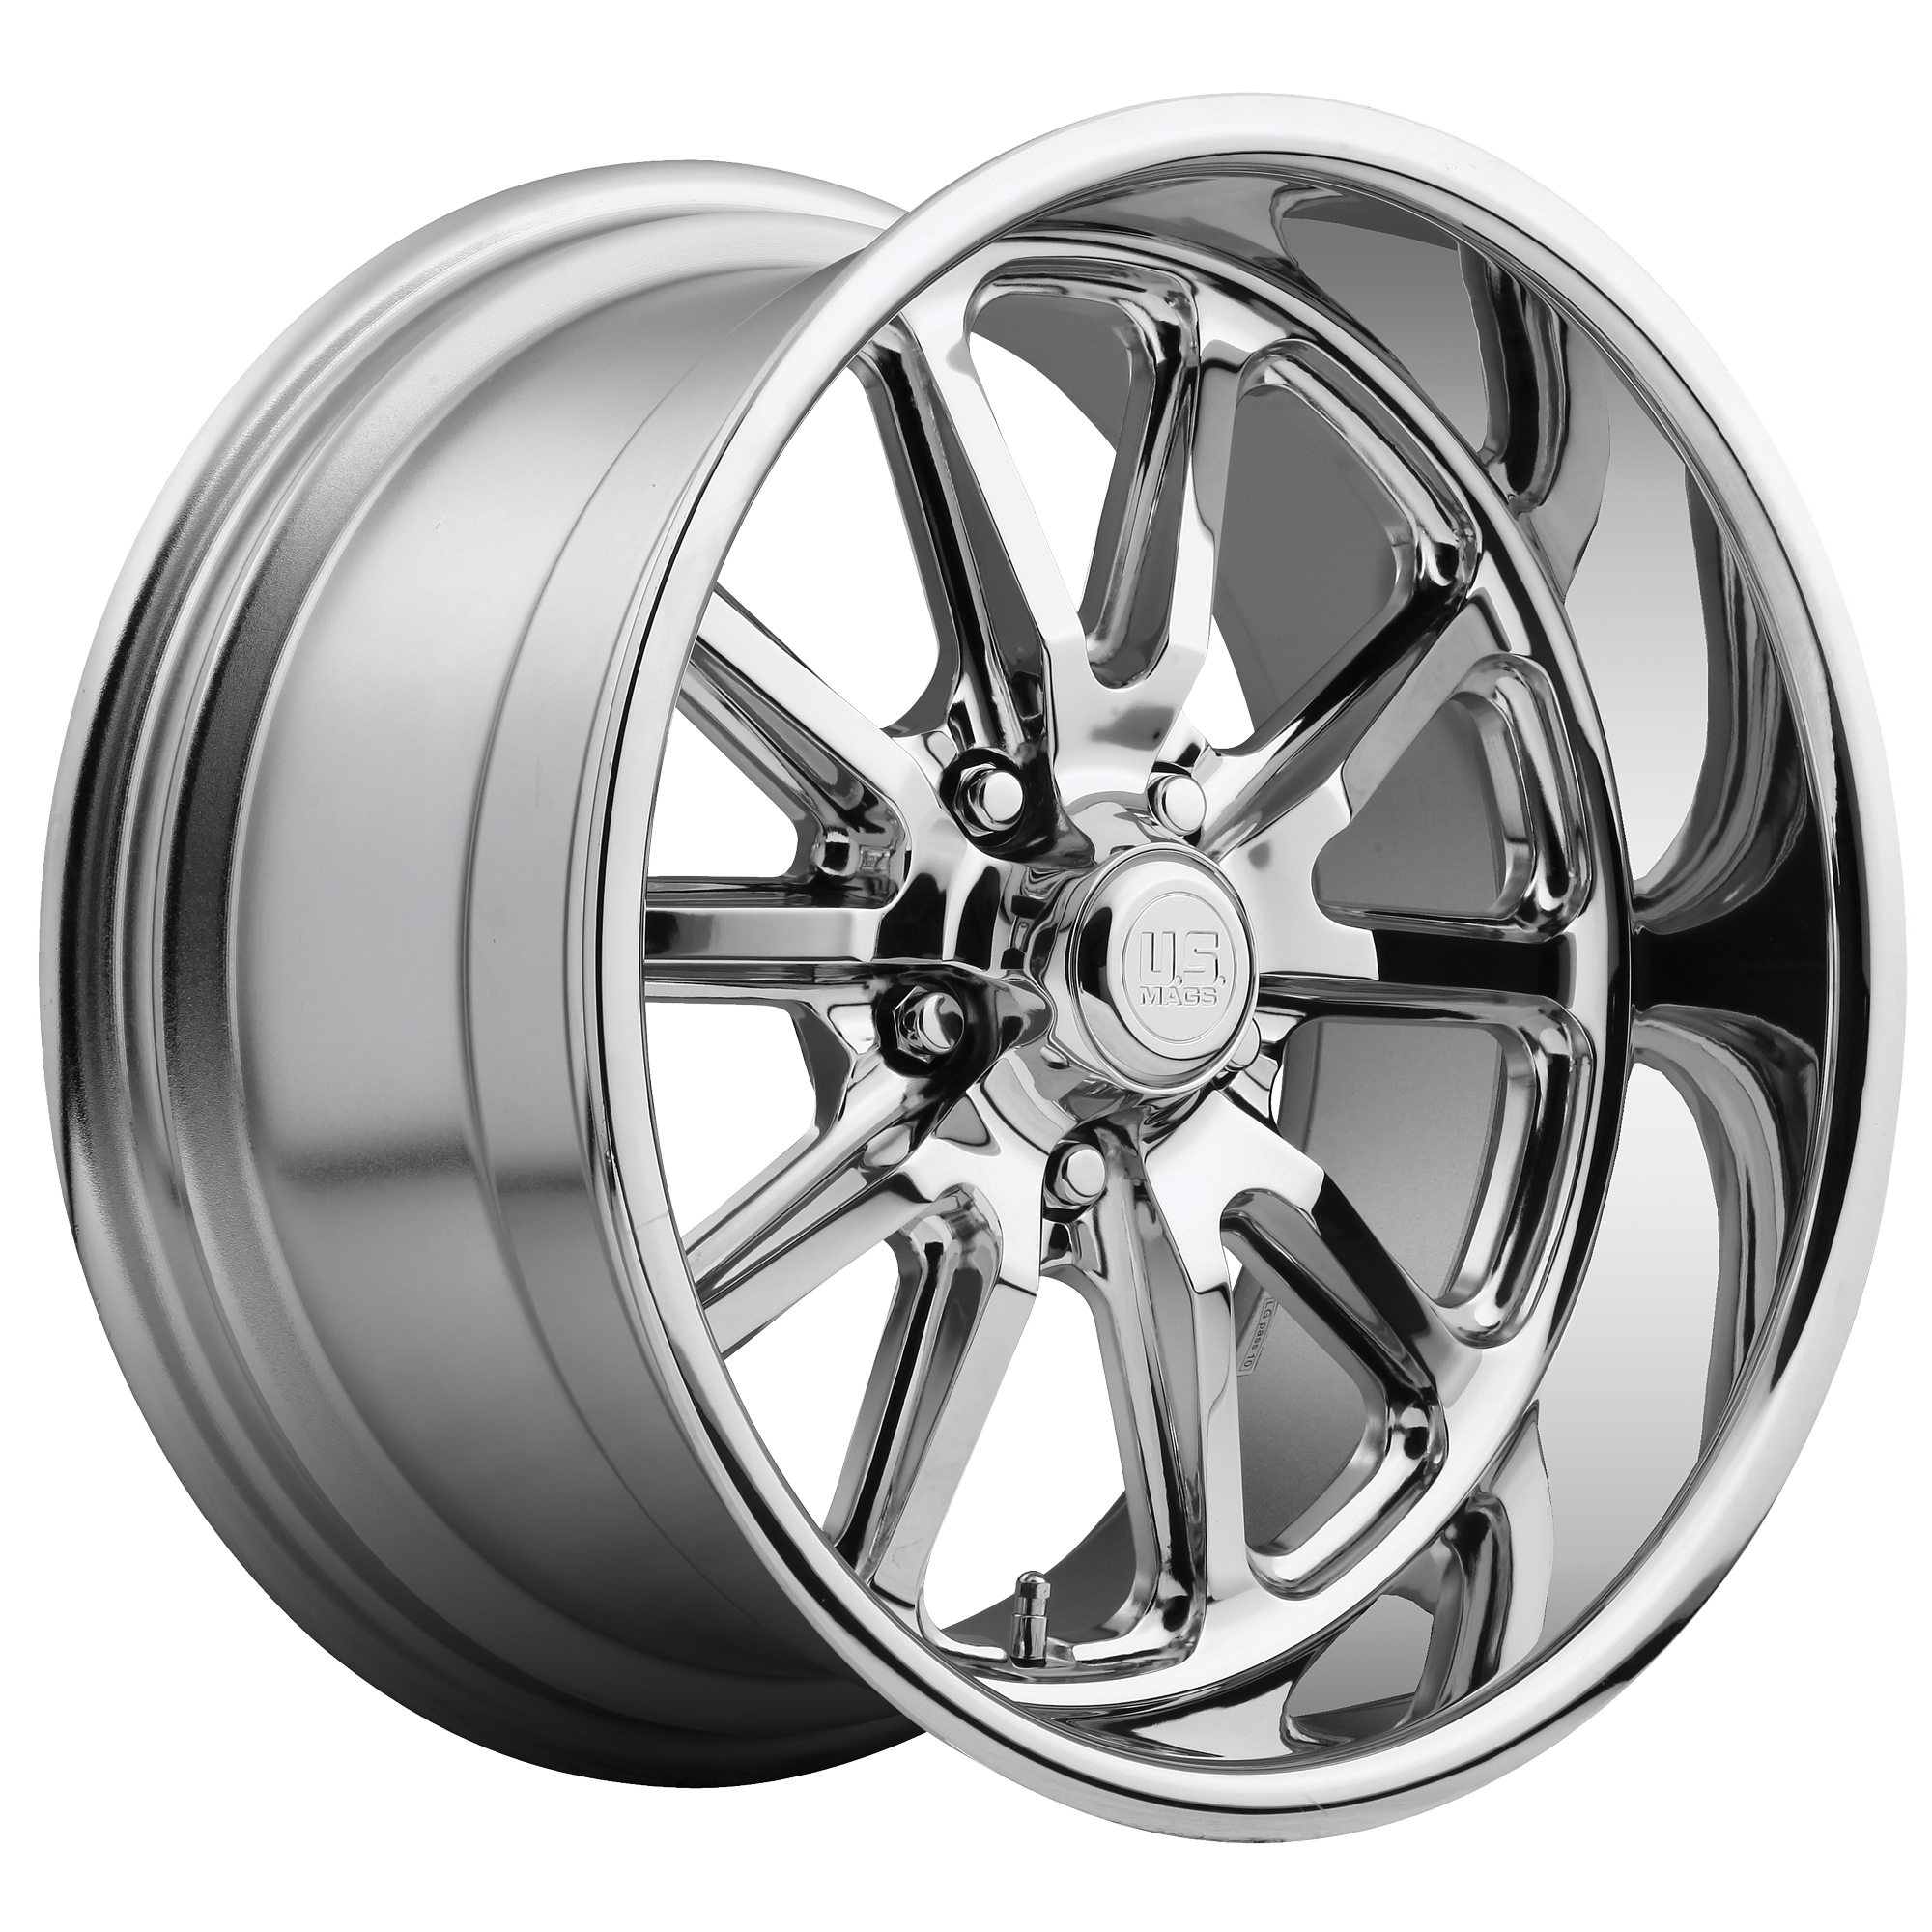 RAMBLER 17x7 5x120.65 CHROME PLATED (1 mm) - Tires and Engine Performance